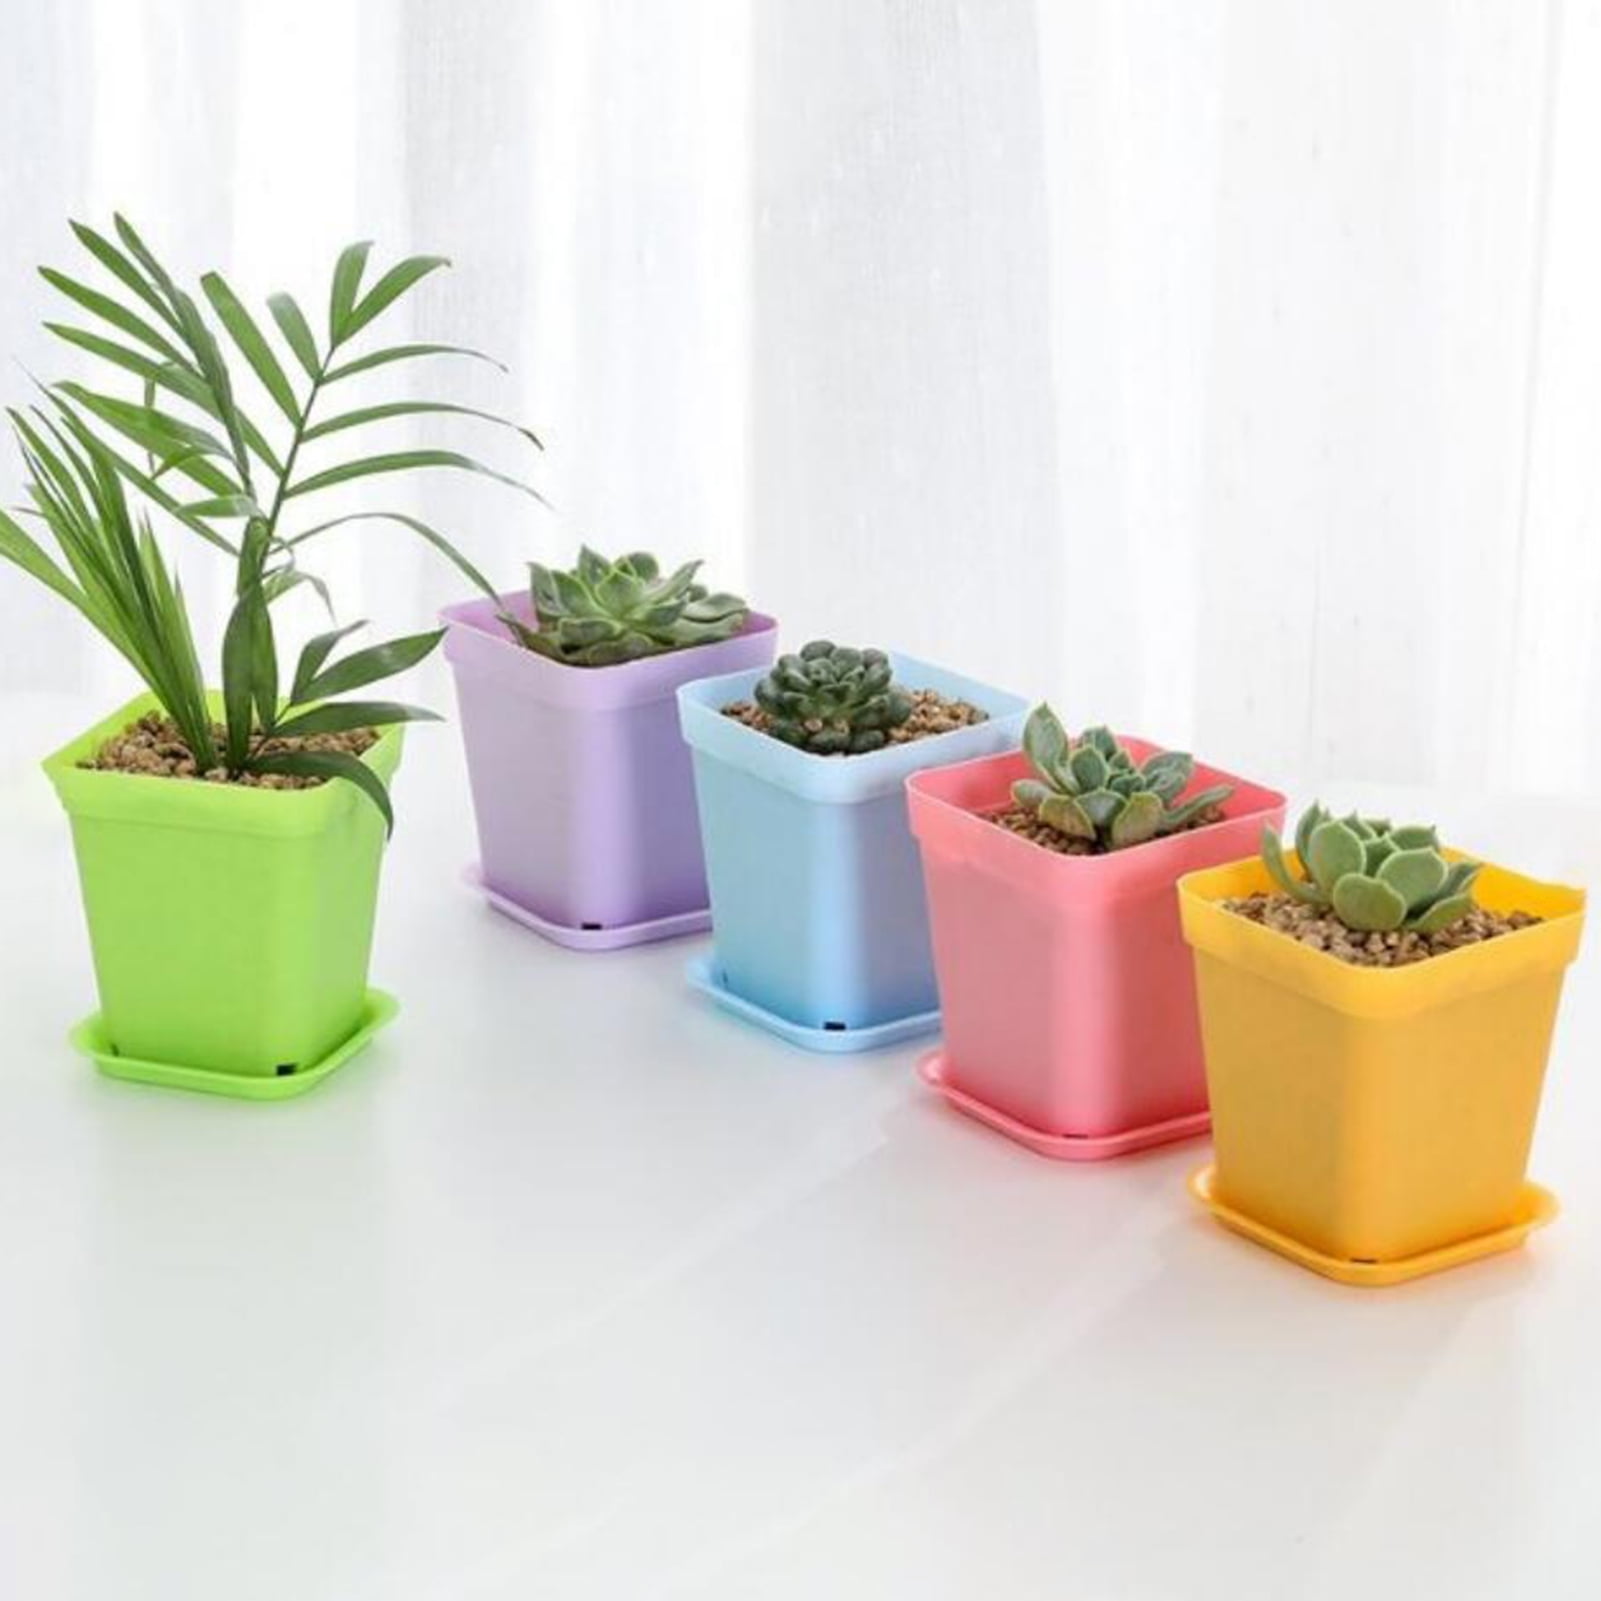 Seeding Nursery Planter Pot Flower Pots for Indoor Outdoor Beige Plastic Planter for Flowers Herbs African Violets Succulents Cactus T4U 20 Pack 13CM Plastic Plant Pots with Drainage and Saucer